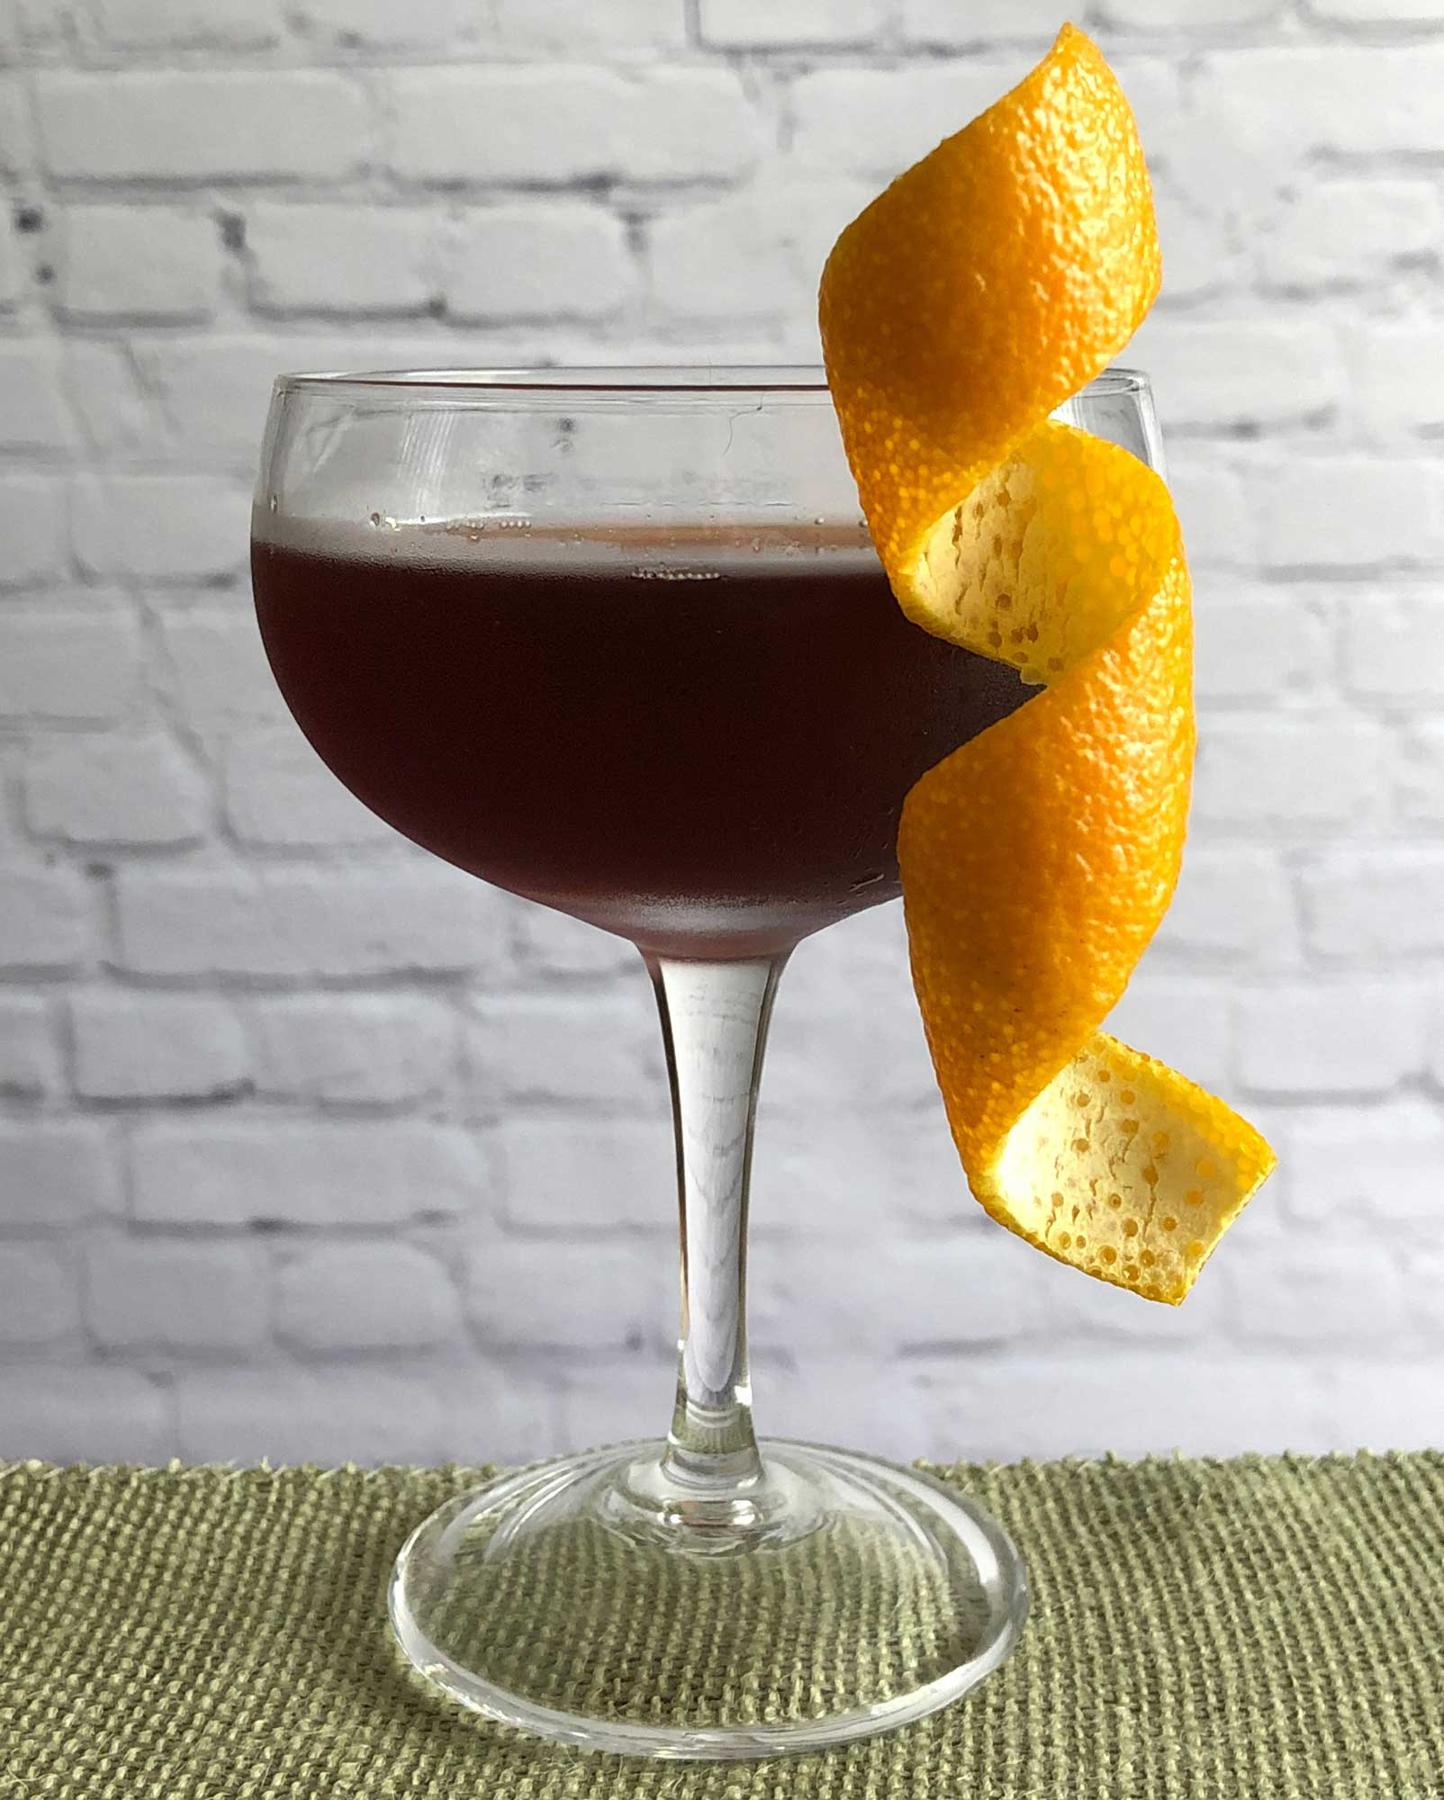 An example of the Cliffhanger, the mixed drink (drink) featuring Dolin Dry Vermouth de Chambéry, Banyuls, and orange twist; photo by Lee Edwards